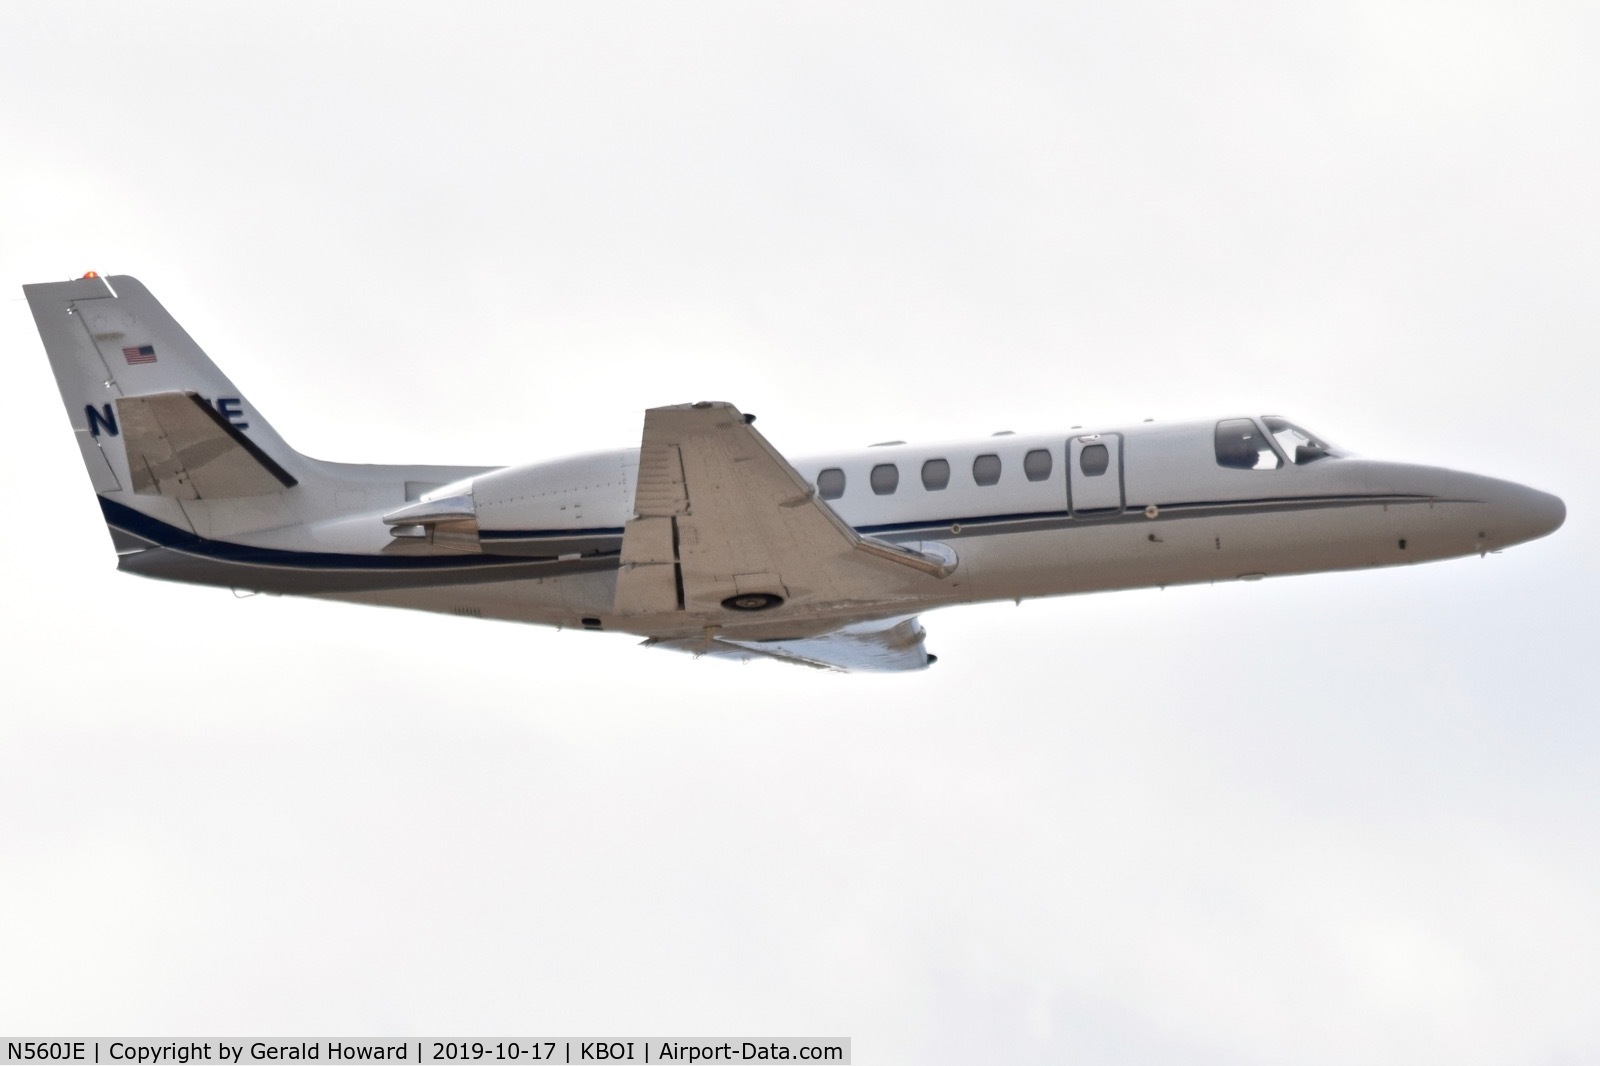 N560JE, 2001 Cessna 560 Citation Encore C/N 560-0581, Climb out from 28R.